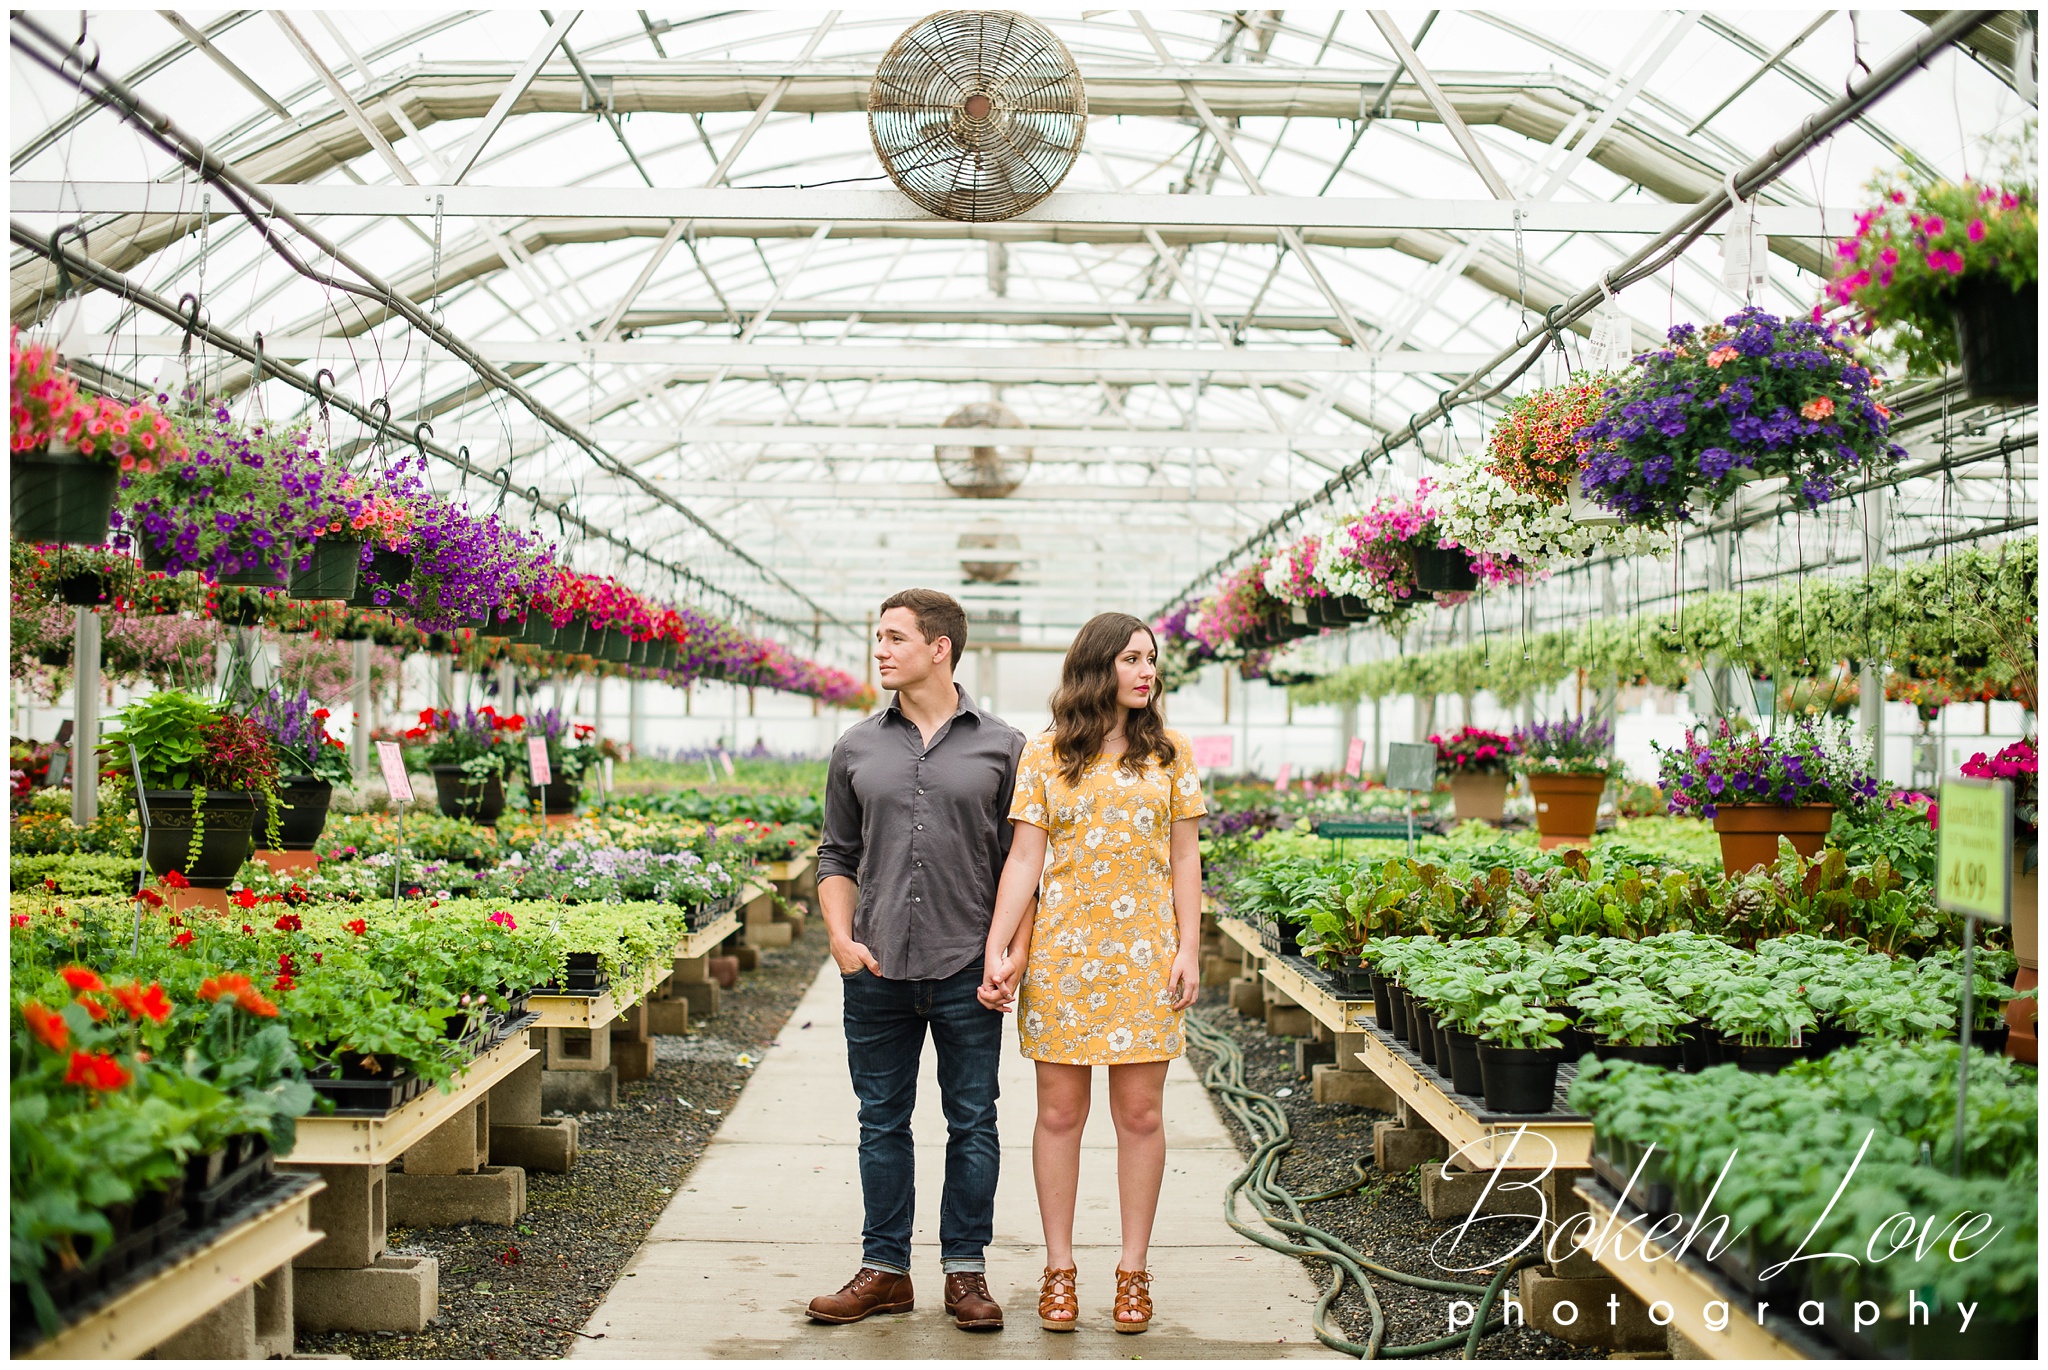 Greenhouse Portraits in Egg Harbor Township